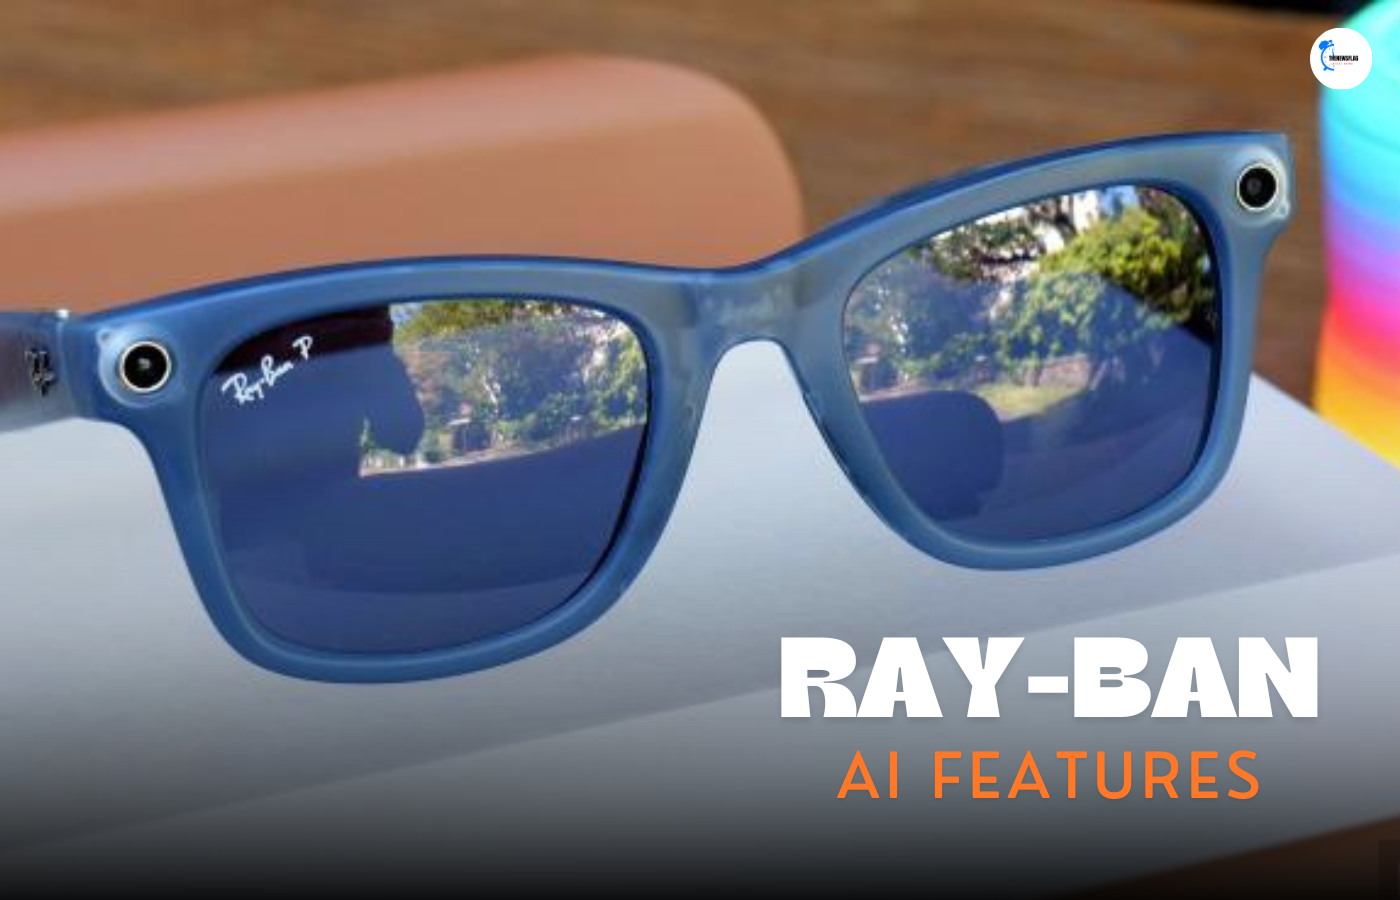 What do ray ban smart glasses do?